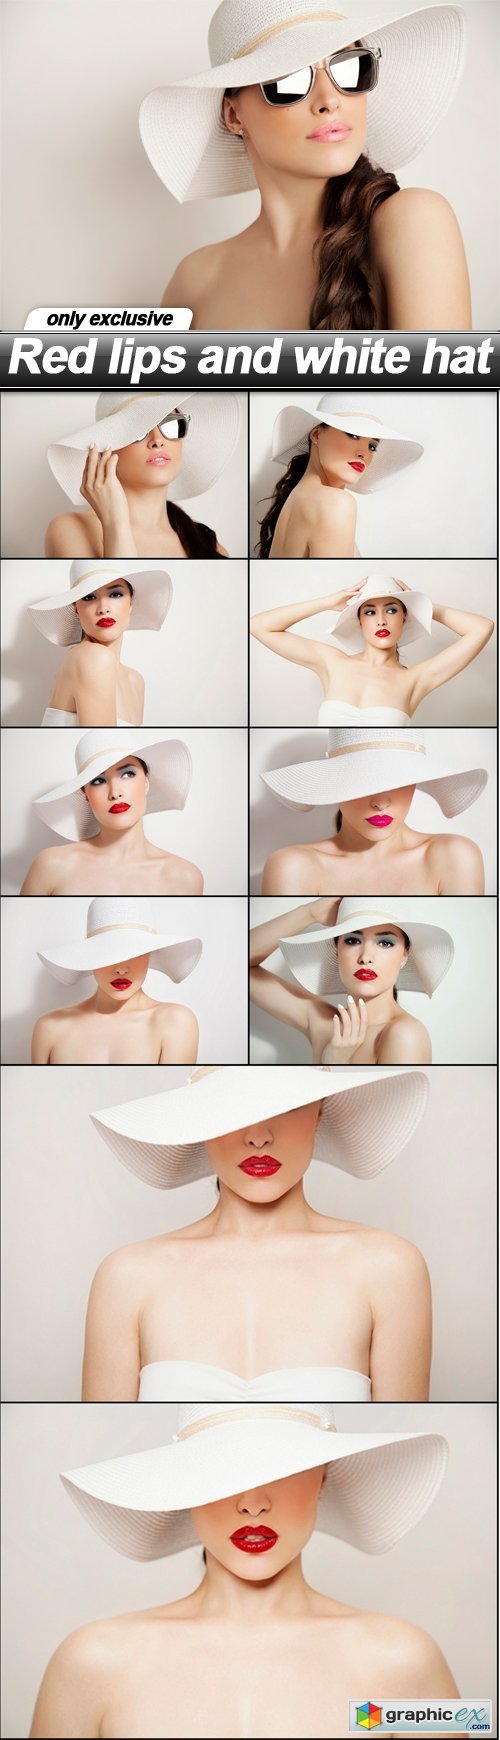 Red lips and white hat - 11 UHQ JPEG